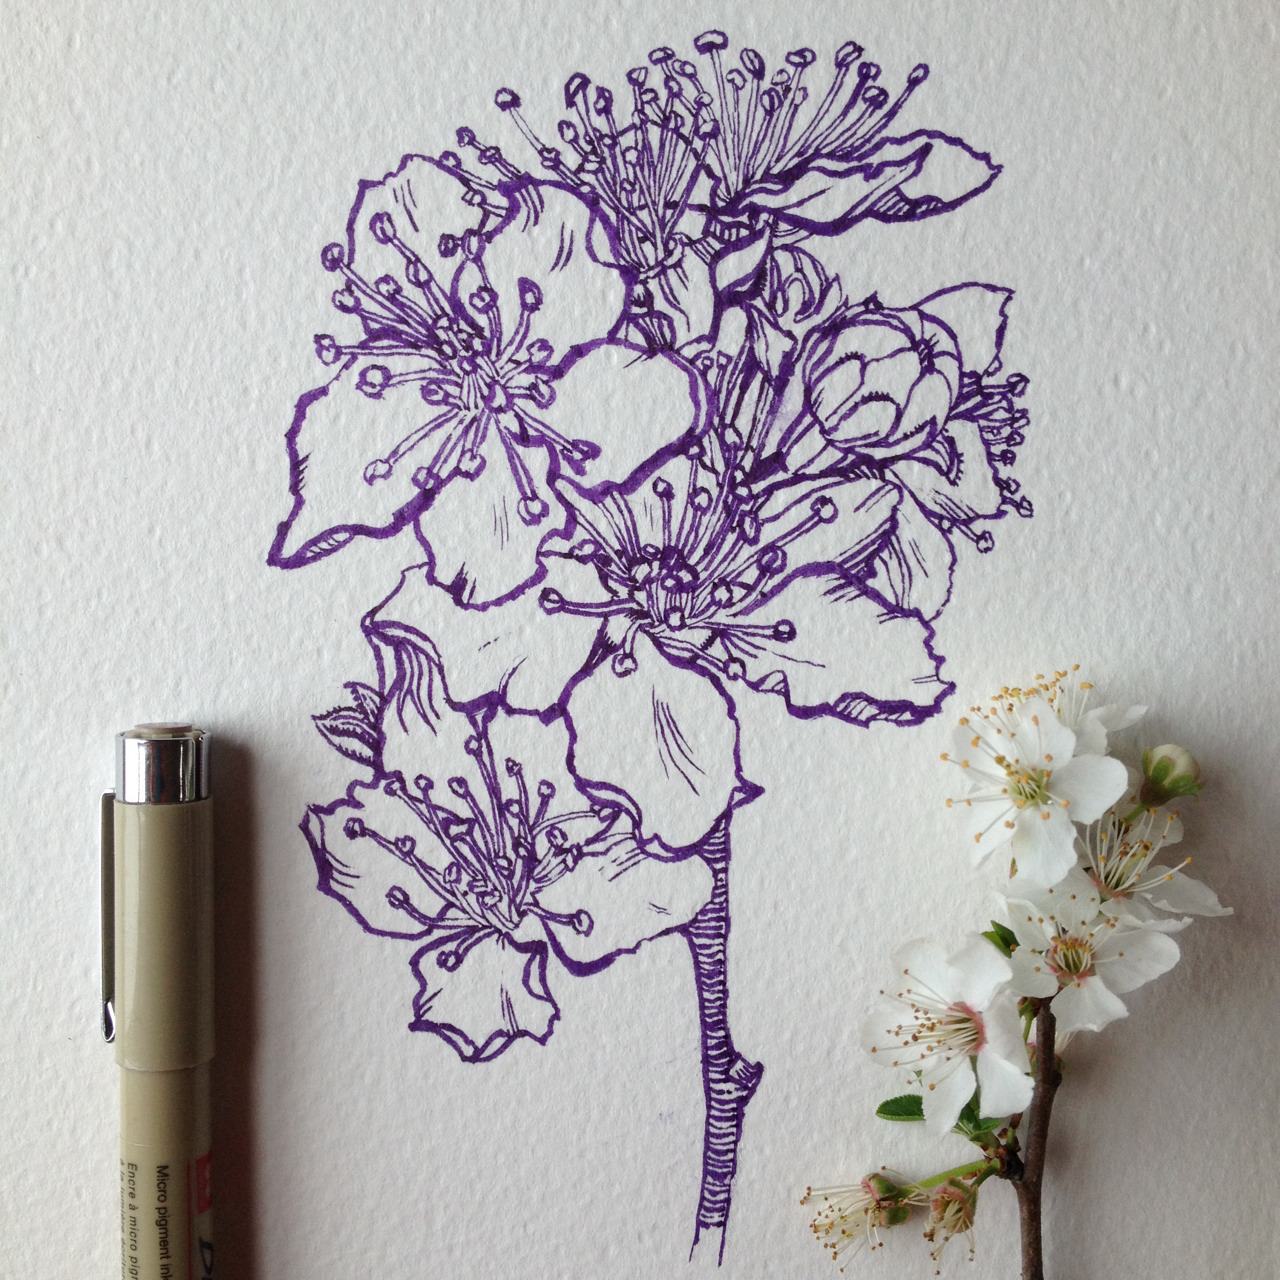 21  Flower Drawings, Art Ideas, Sketches  Design Trends